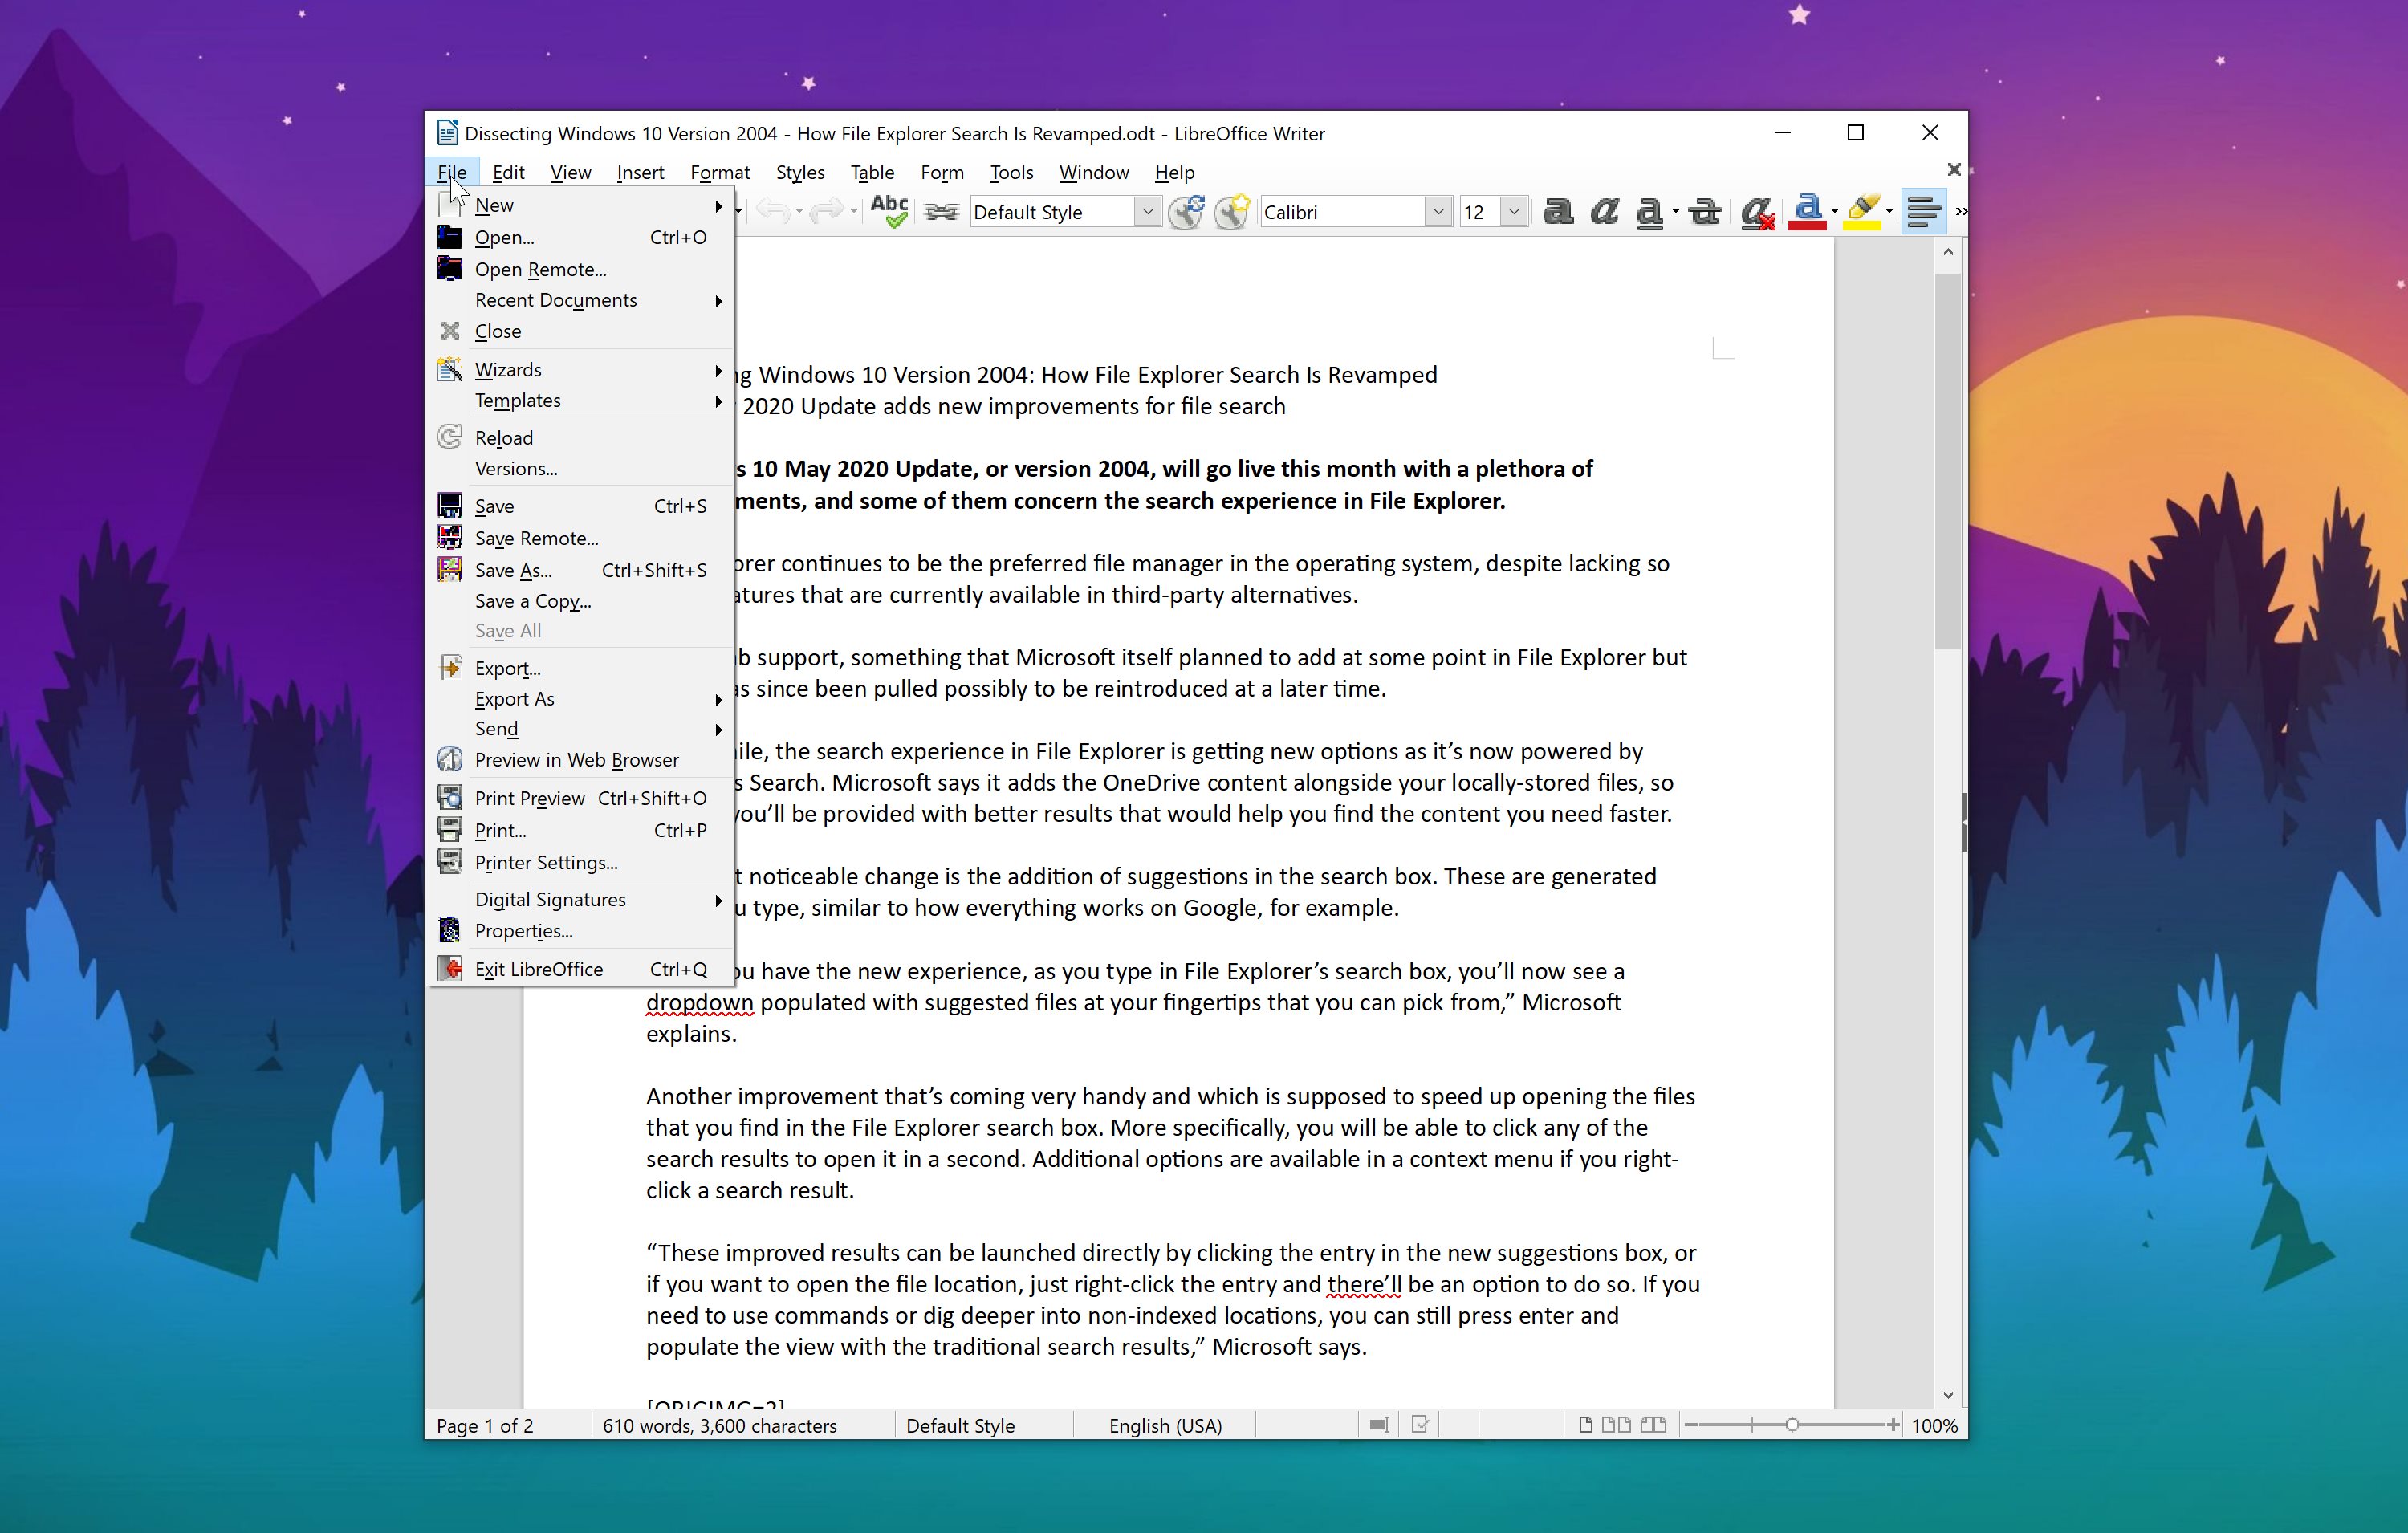 for mac download LibreOffice 7.5.5